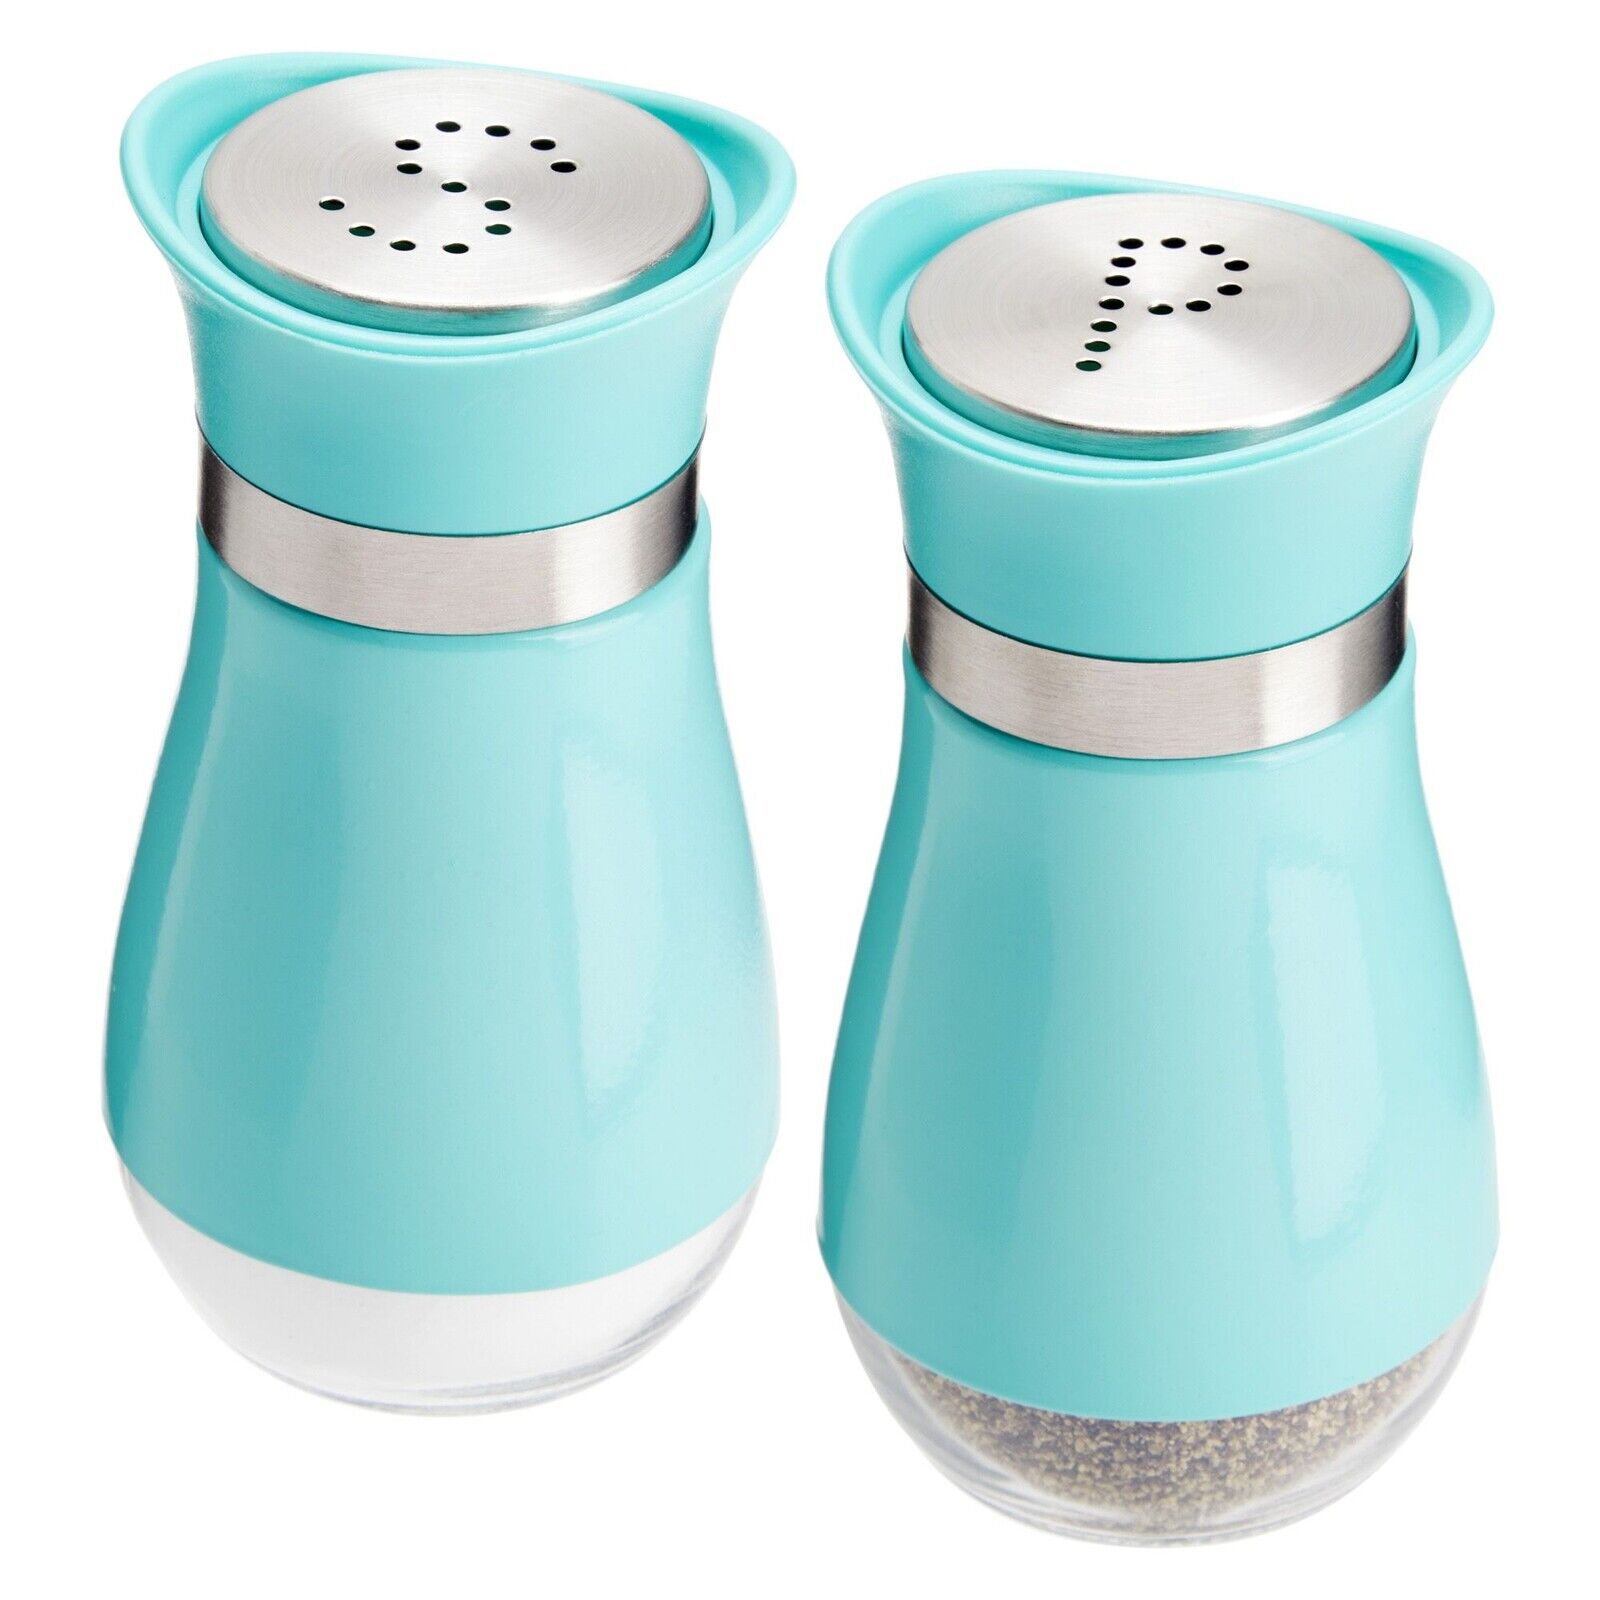 2 Pieces Set Teal Stainless Steel Salt and Pepper Shakers with Glass Bottom